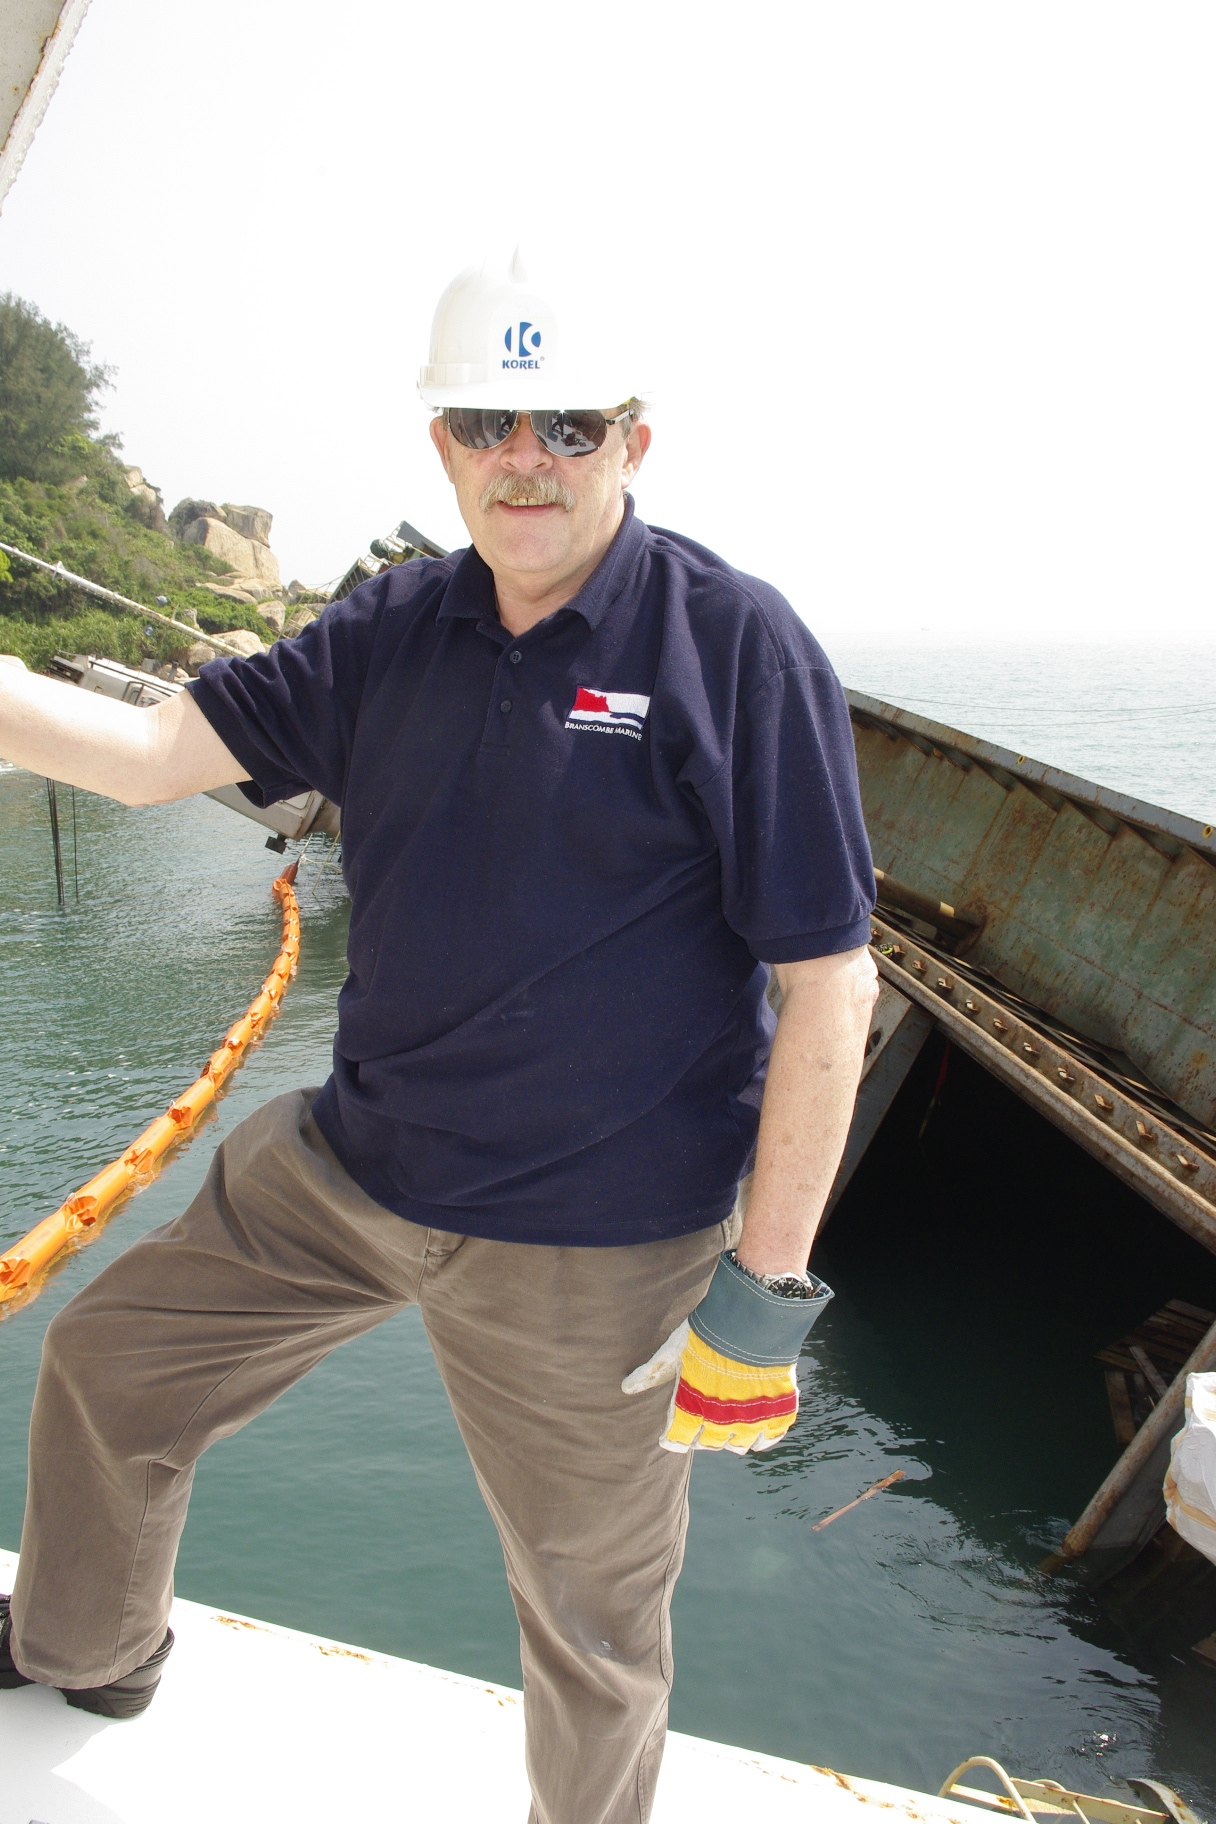 Alan Loynd,, surveying the wreck of ‘Sunrise Orient’ off Cheung Chau in May 2014.

CREDIT: Alan Loynd